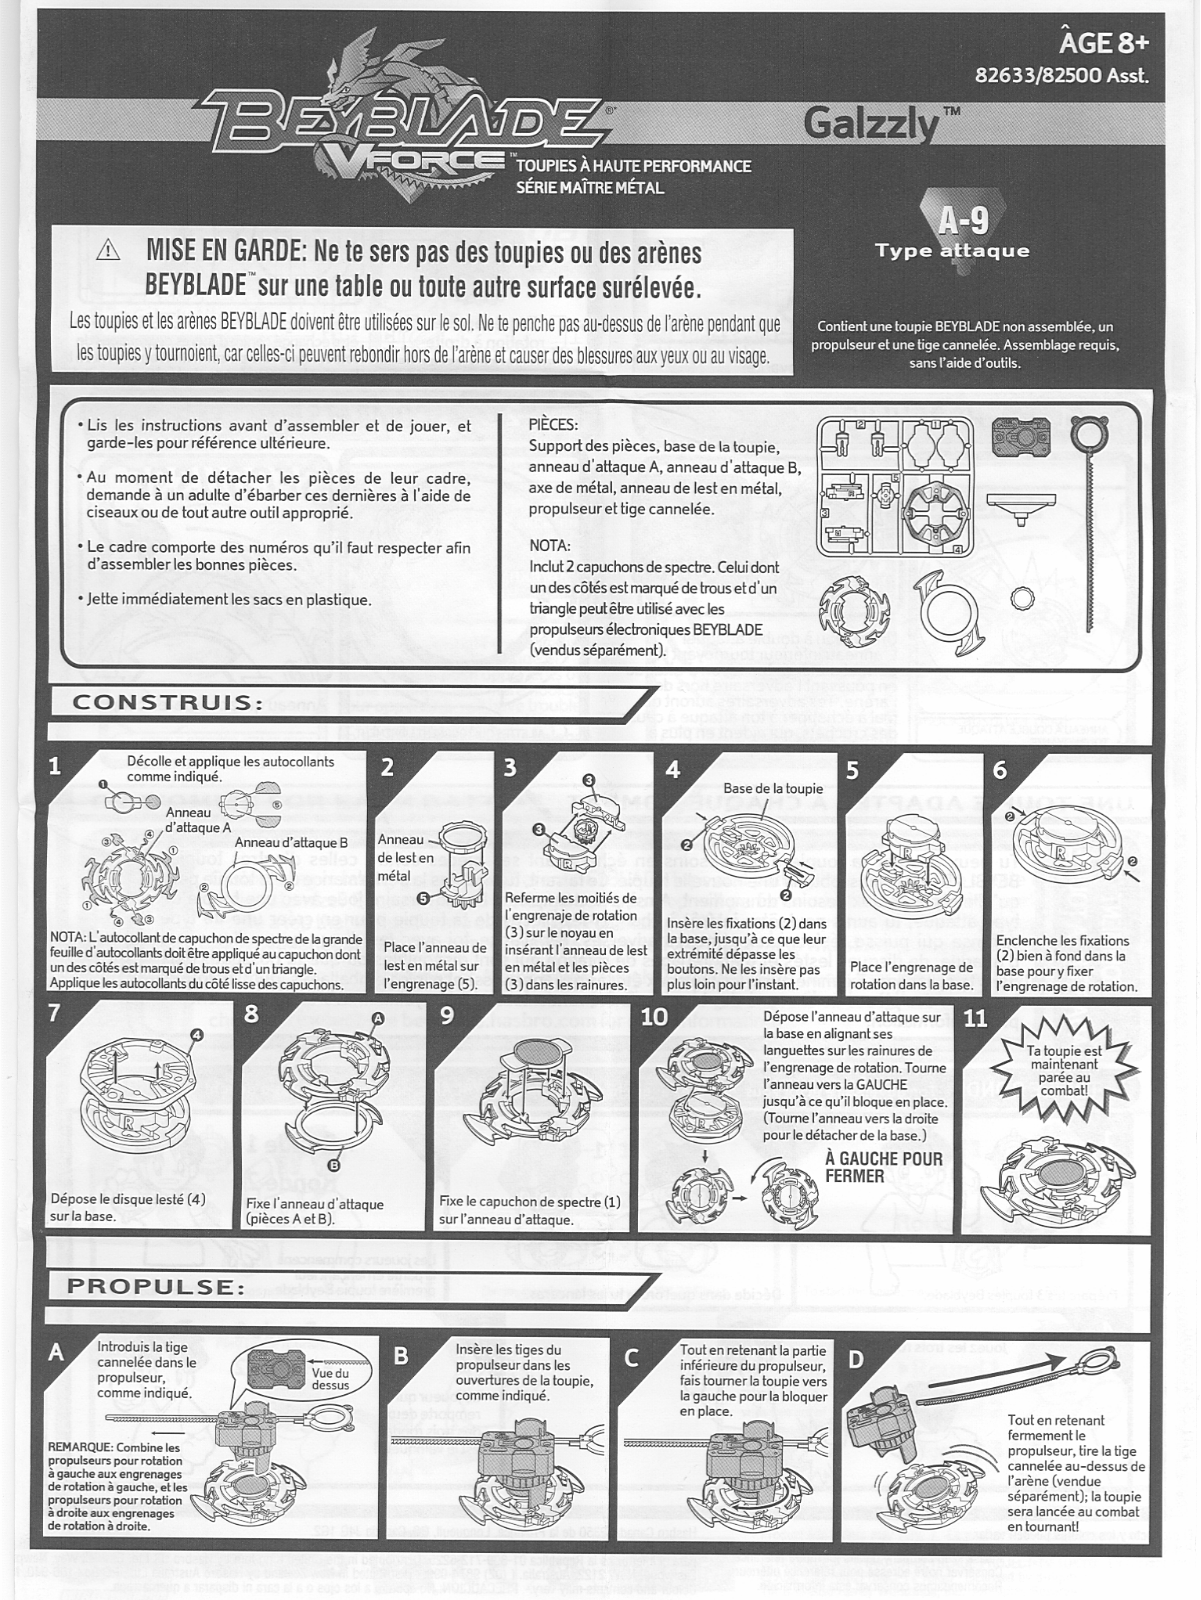 HASBRO Beyblade V Force Galzzly A9 User Manual